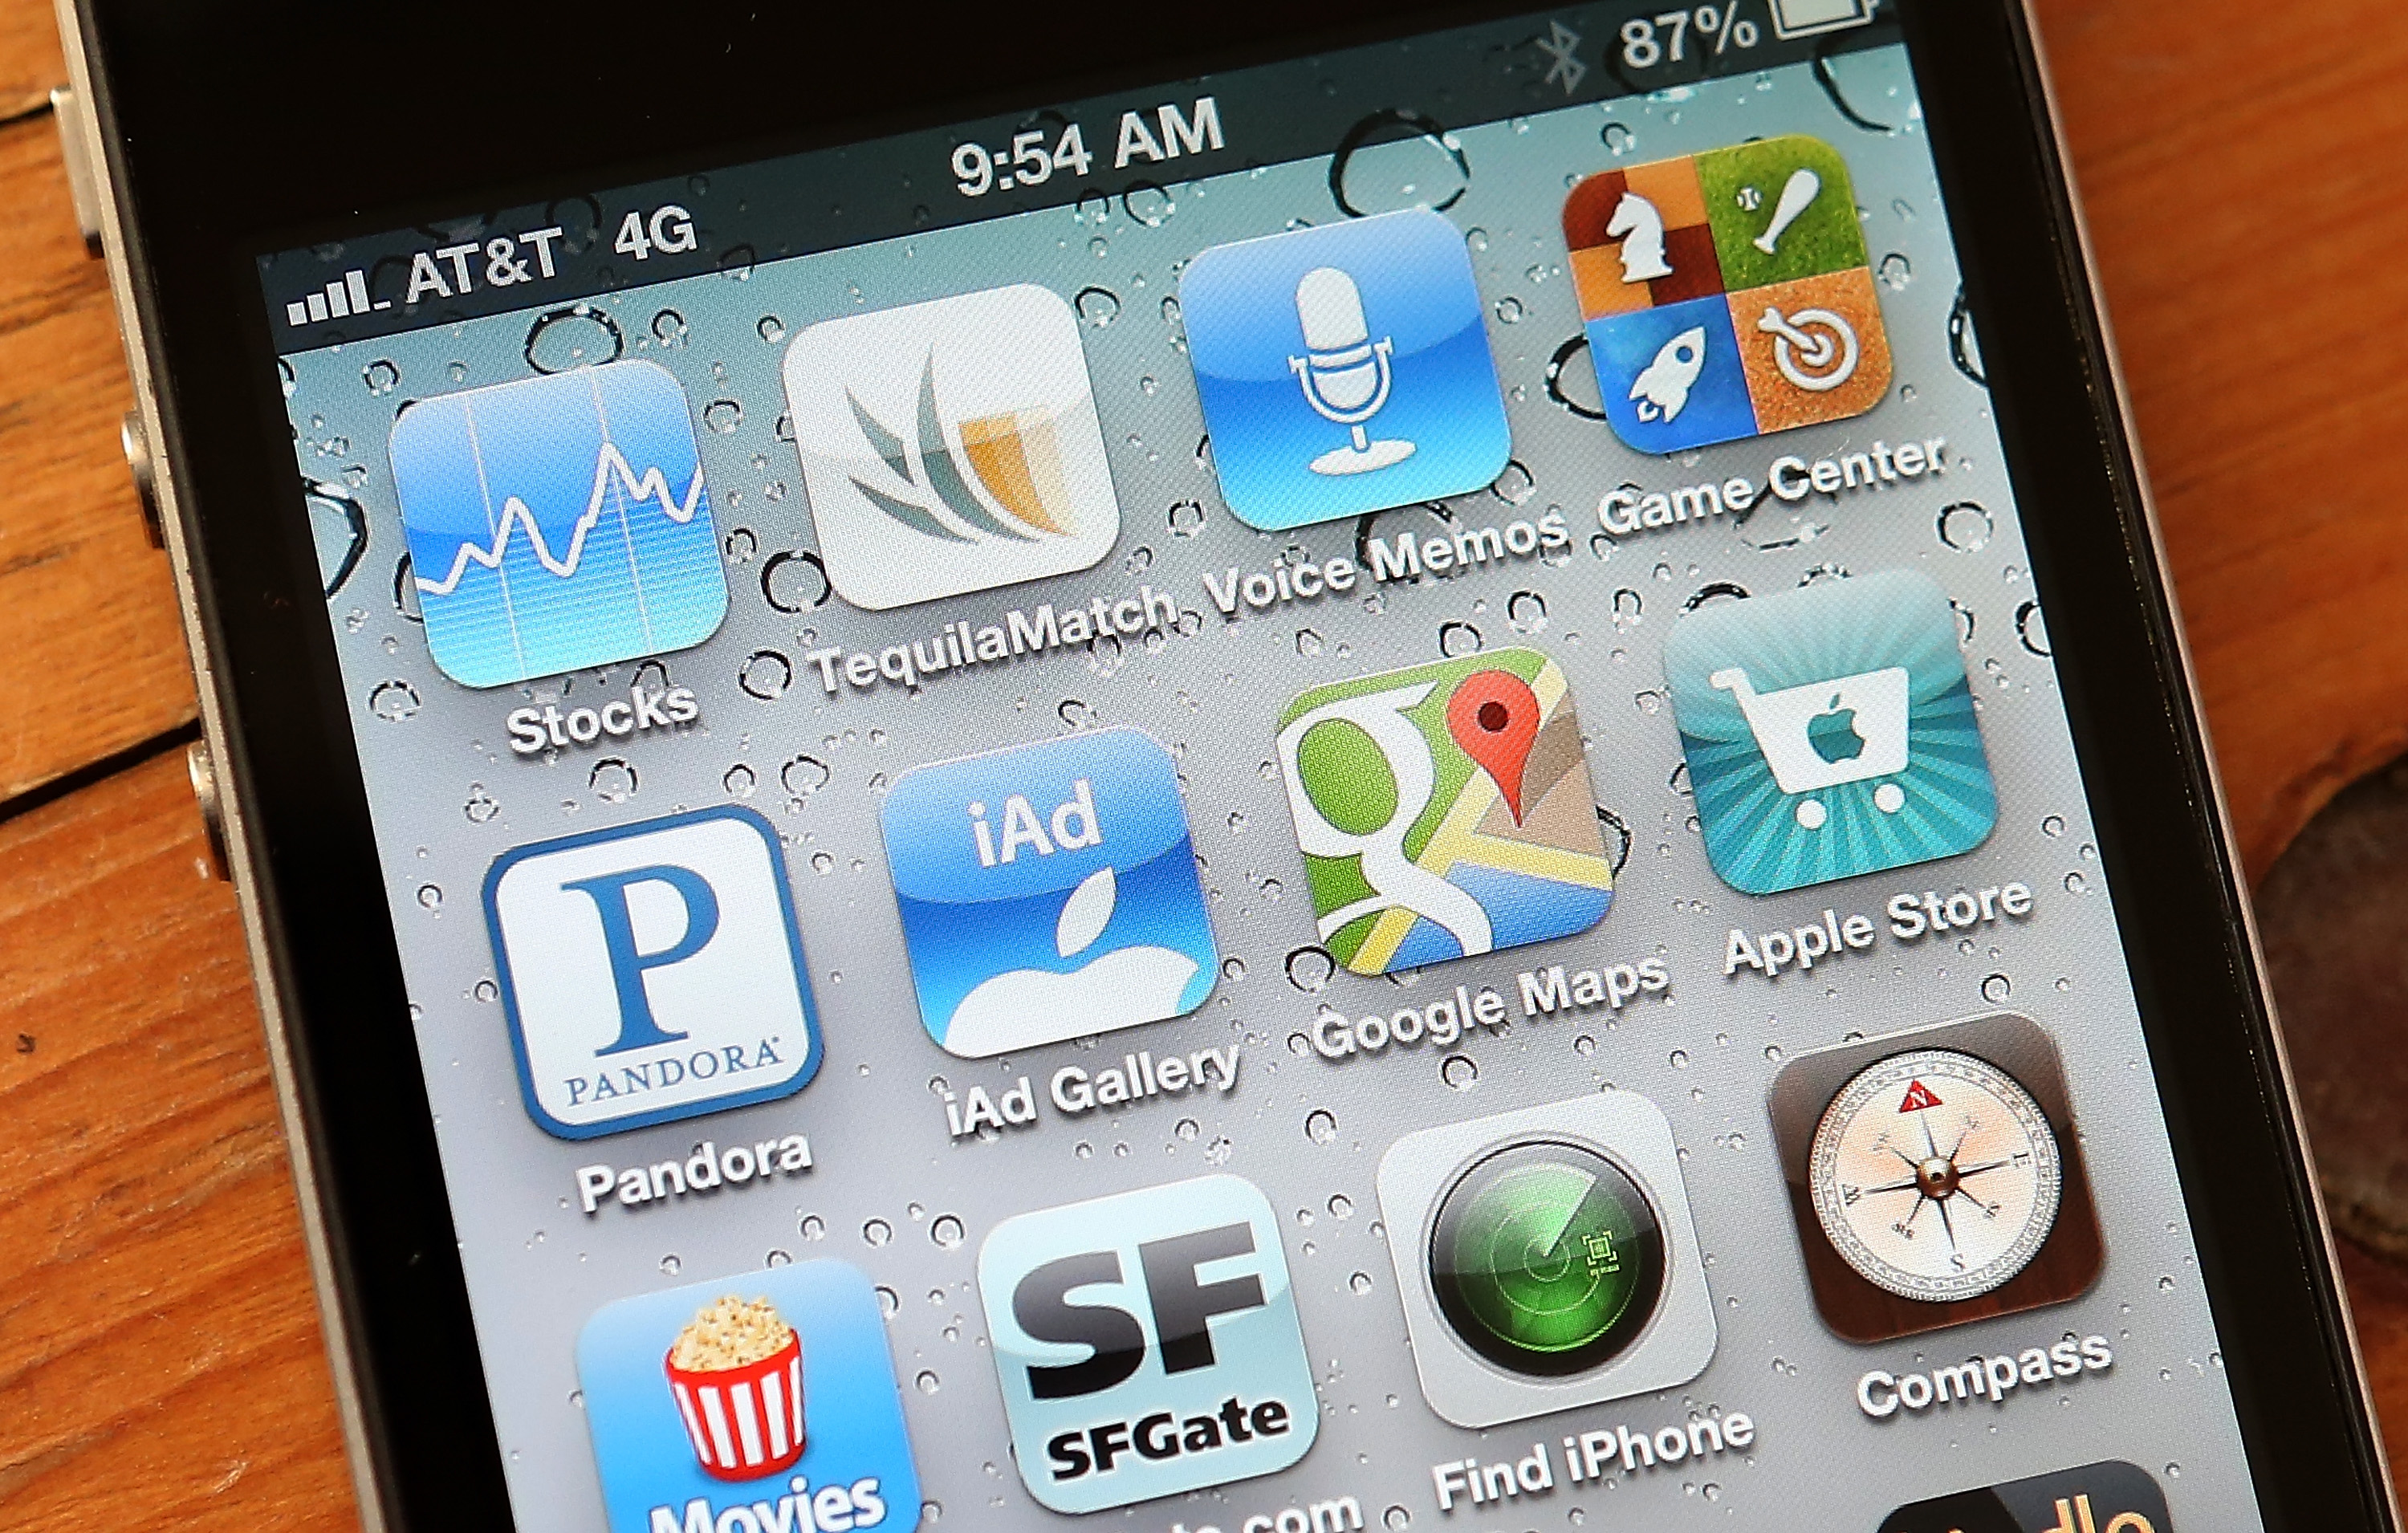 An icon for the Google Maps app is seen on an Apple iPhone 4S on December 13, 2012 in Fairfax, California. (Justin Sullivan&mdash;Getty Images)